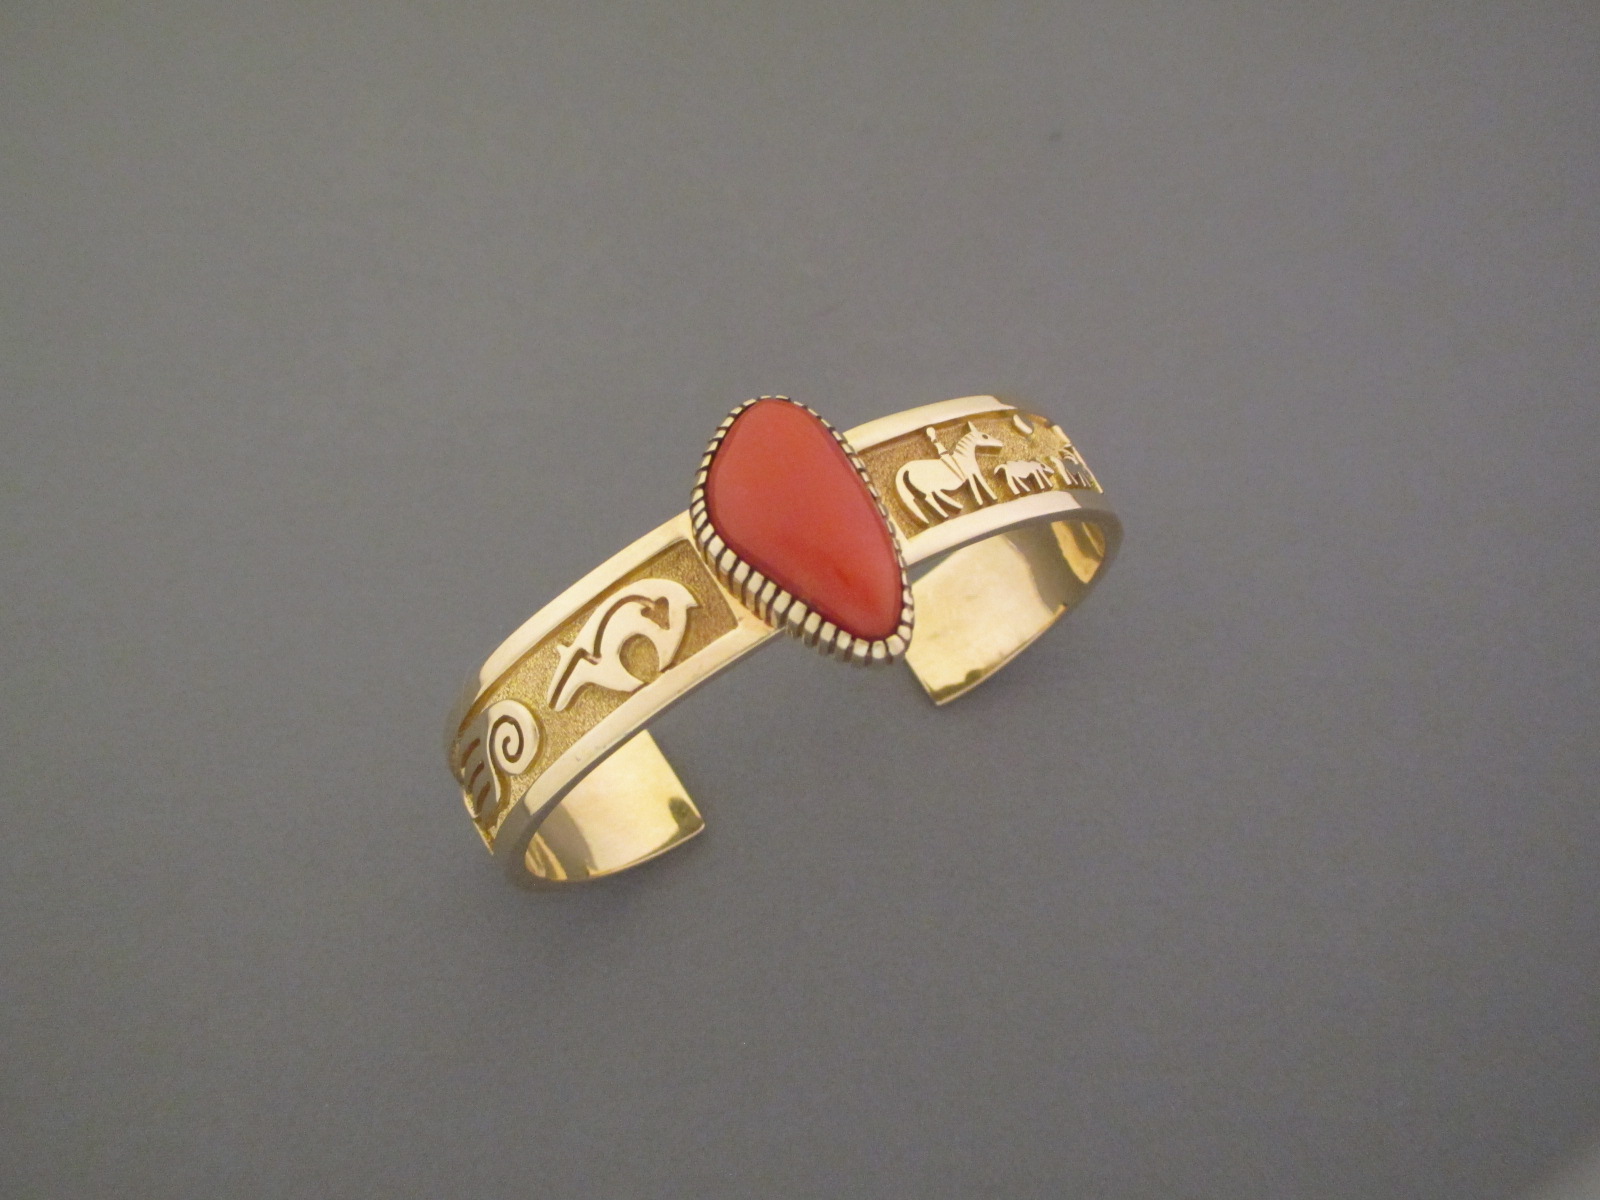 Coral & Gold Bracelet - 14kt Gold & Coral Cuff Bracelet by Navajo Indian jewelry artist, Robert Taylor $4,200-